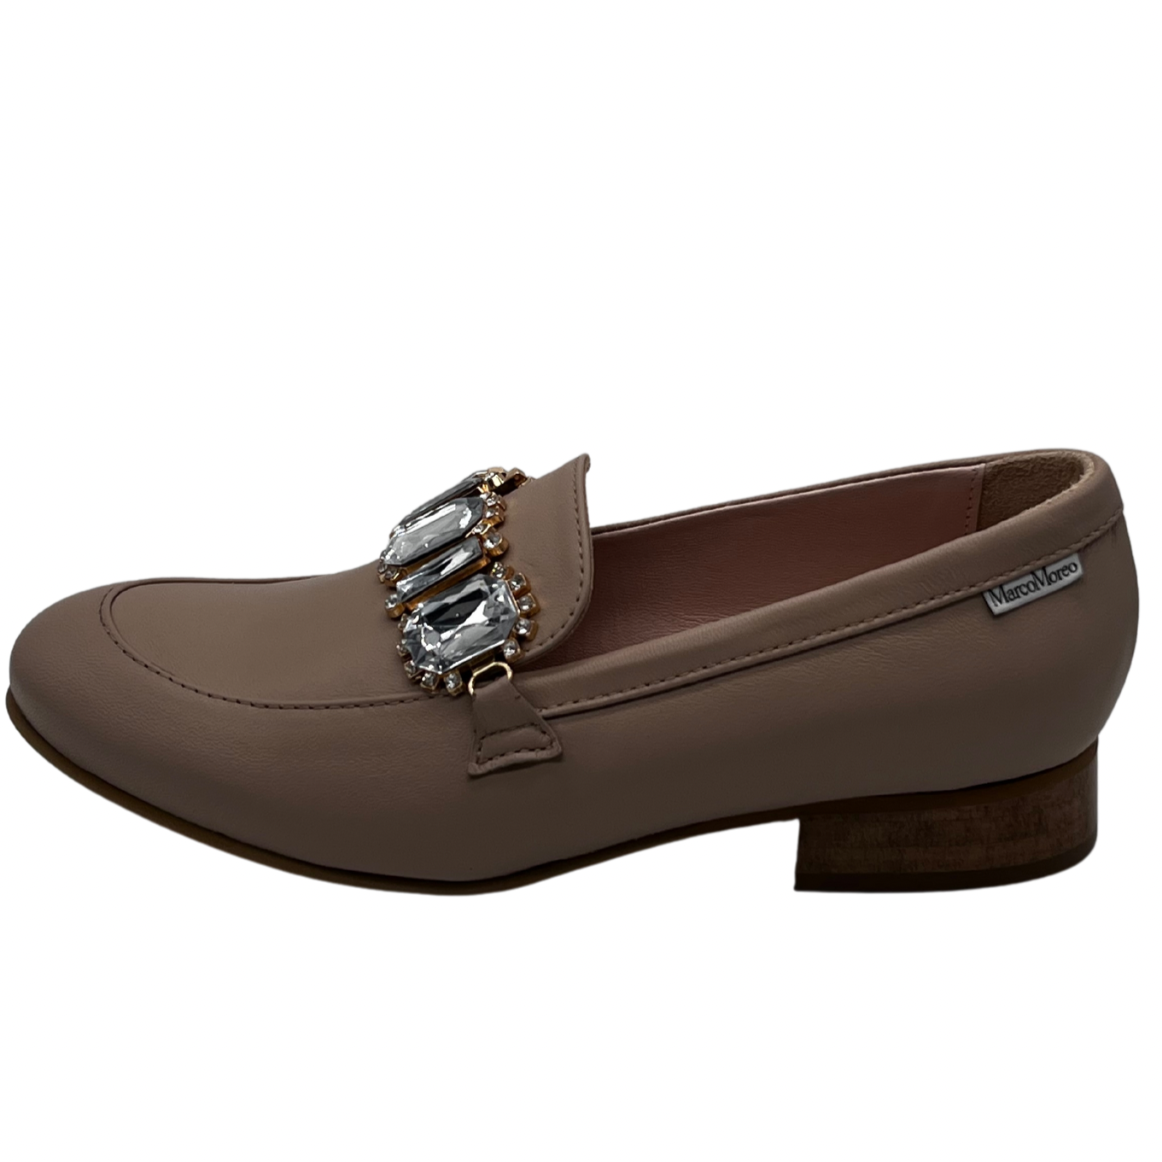 Marco Moreo Leather Beige Loafer With Jewel Details